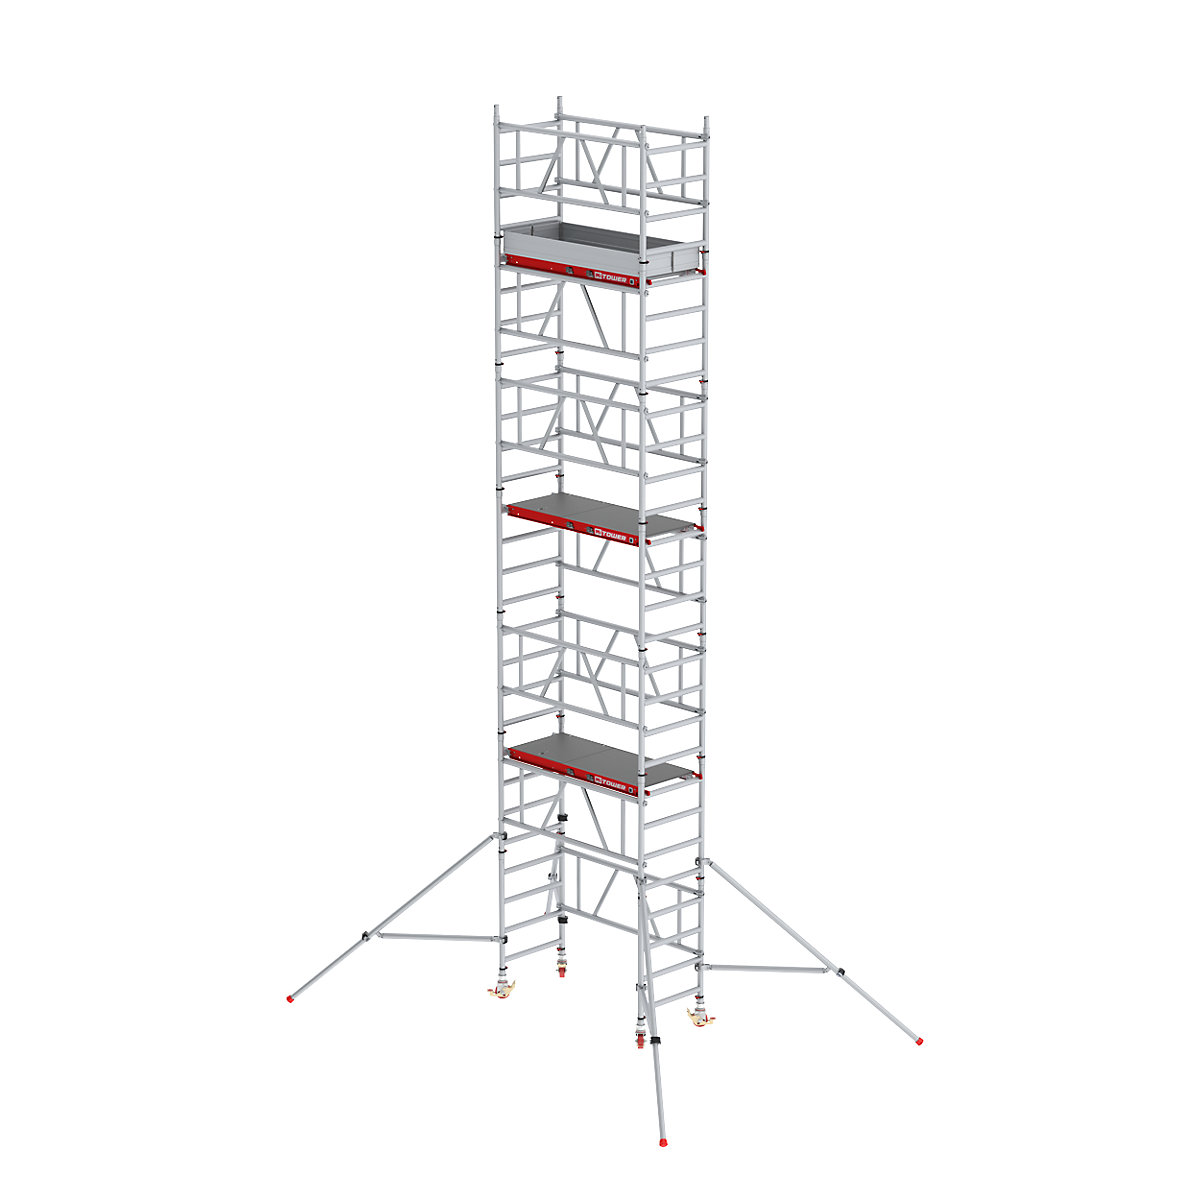 MiTOWER Plus quick assembly mobile access tower – Altrex, Fiber-Deck® platform, working height 8 m-2